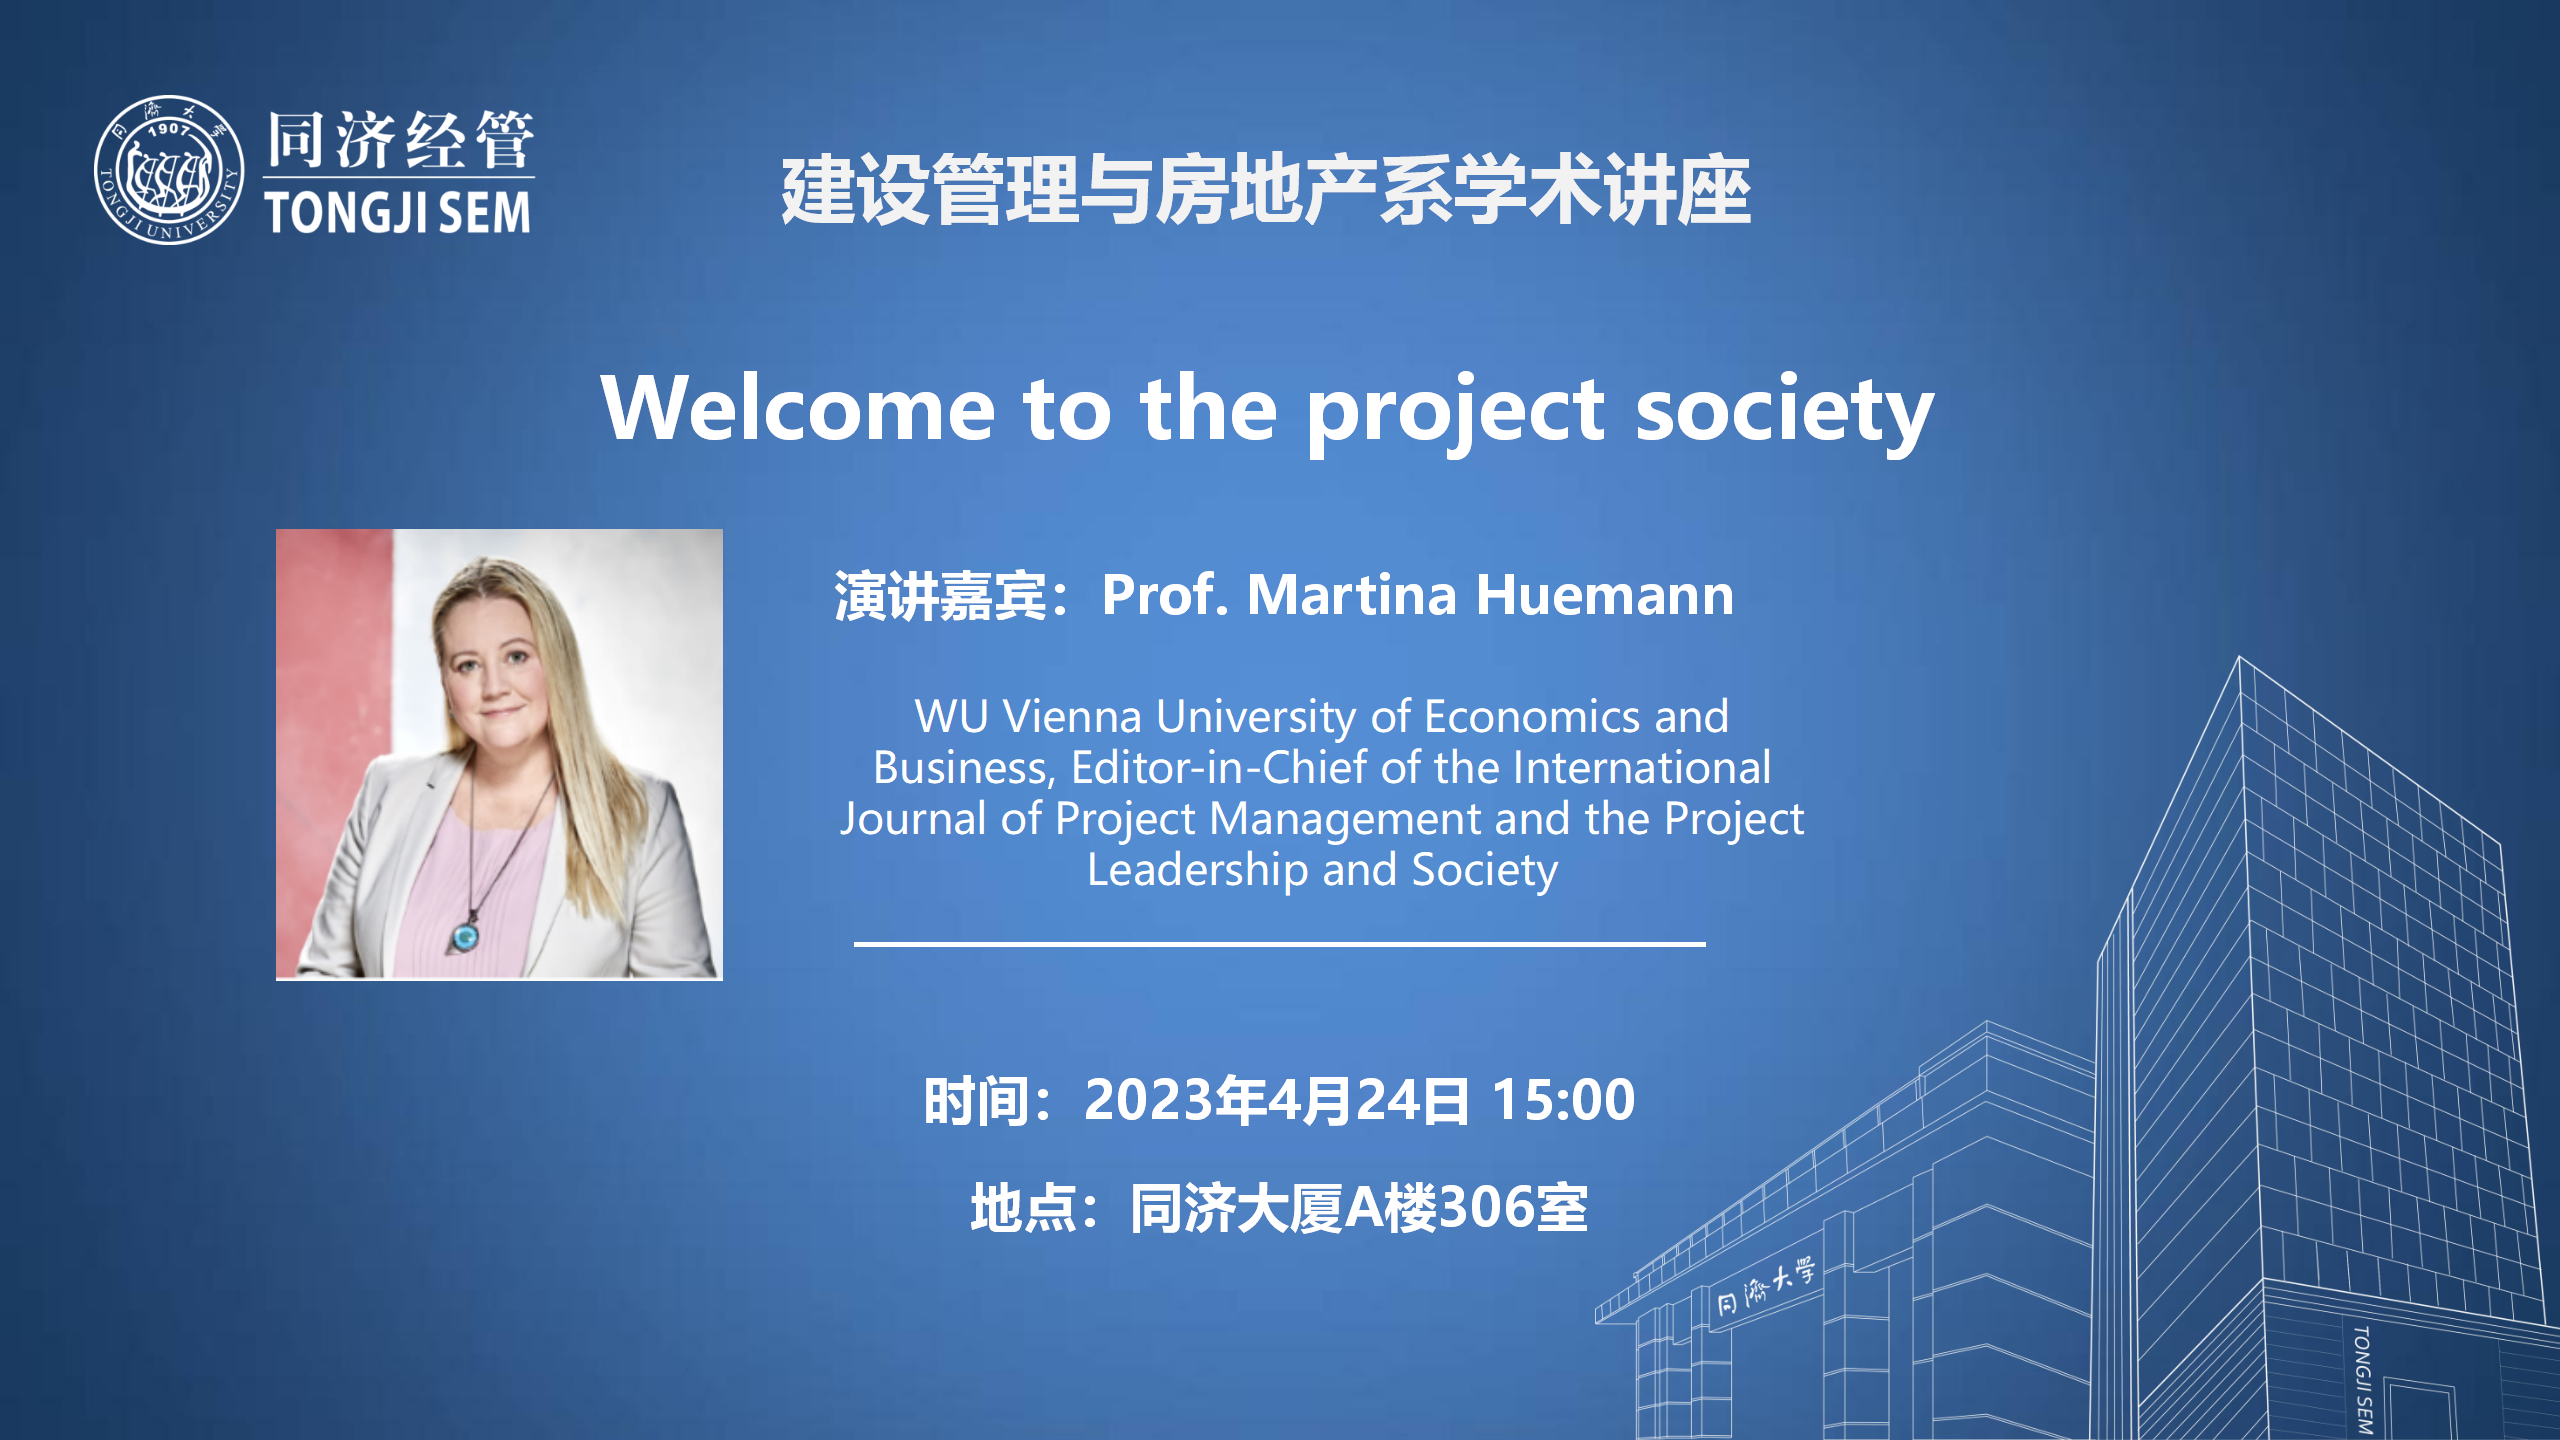 Welcome to the project society